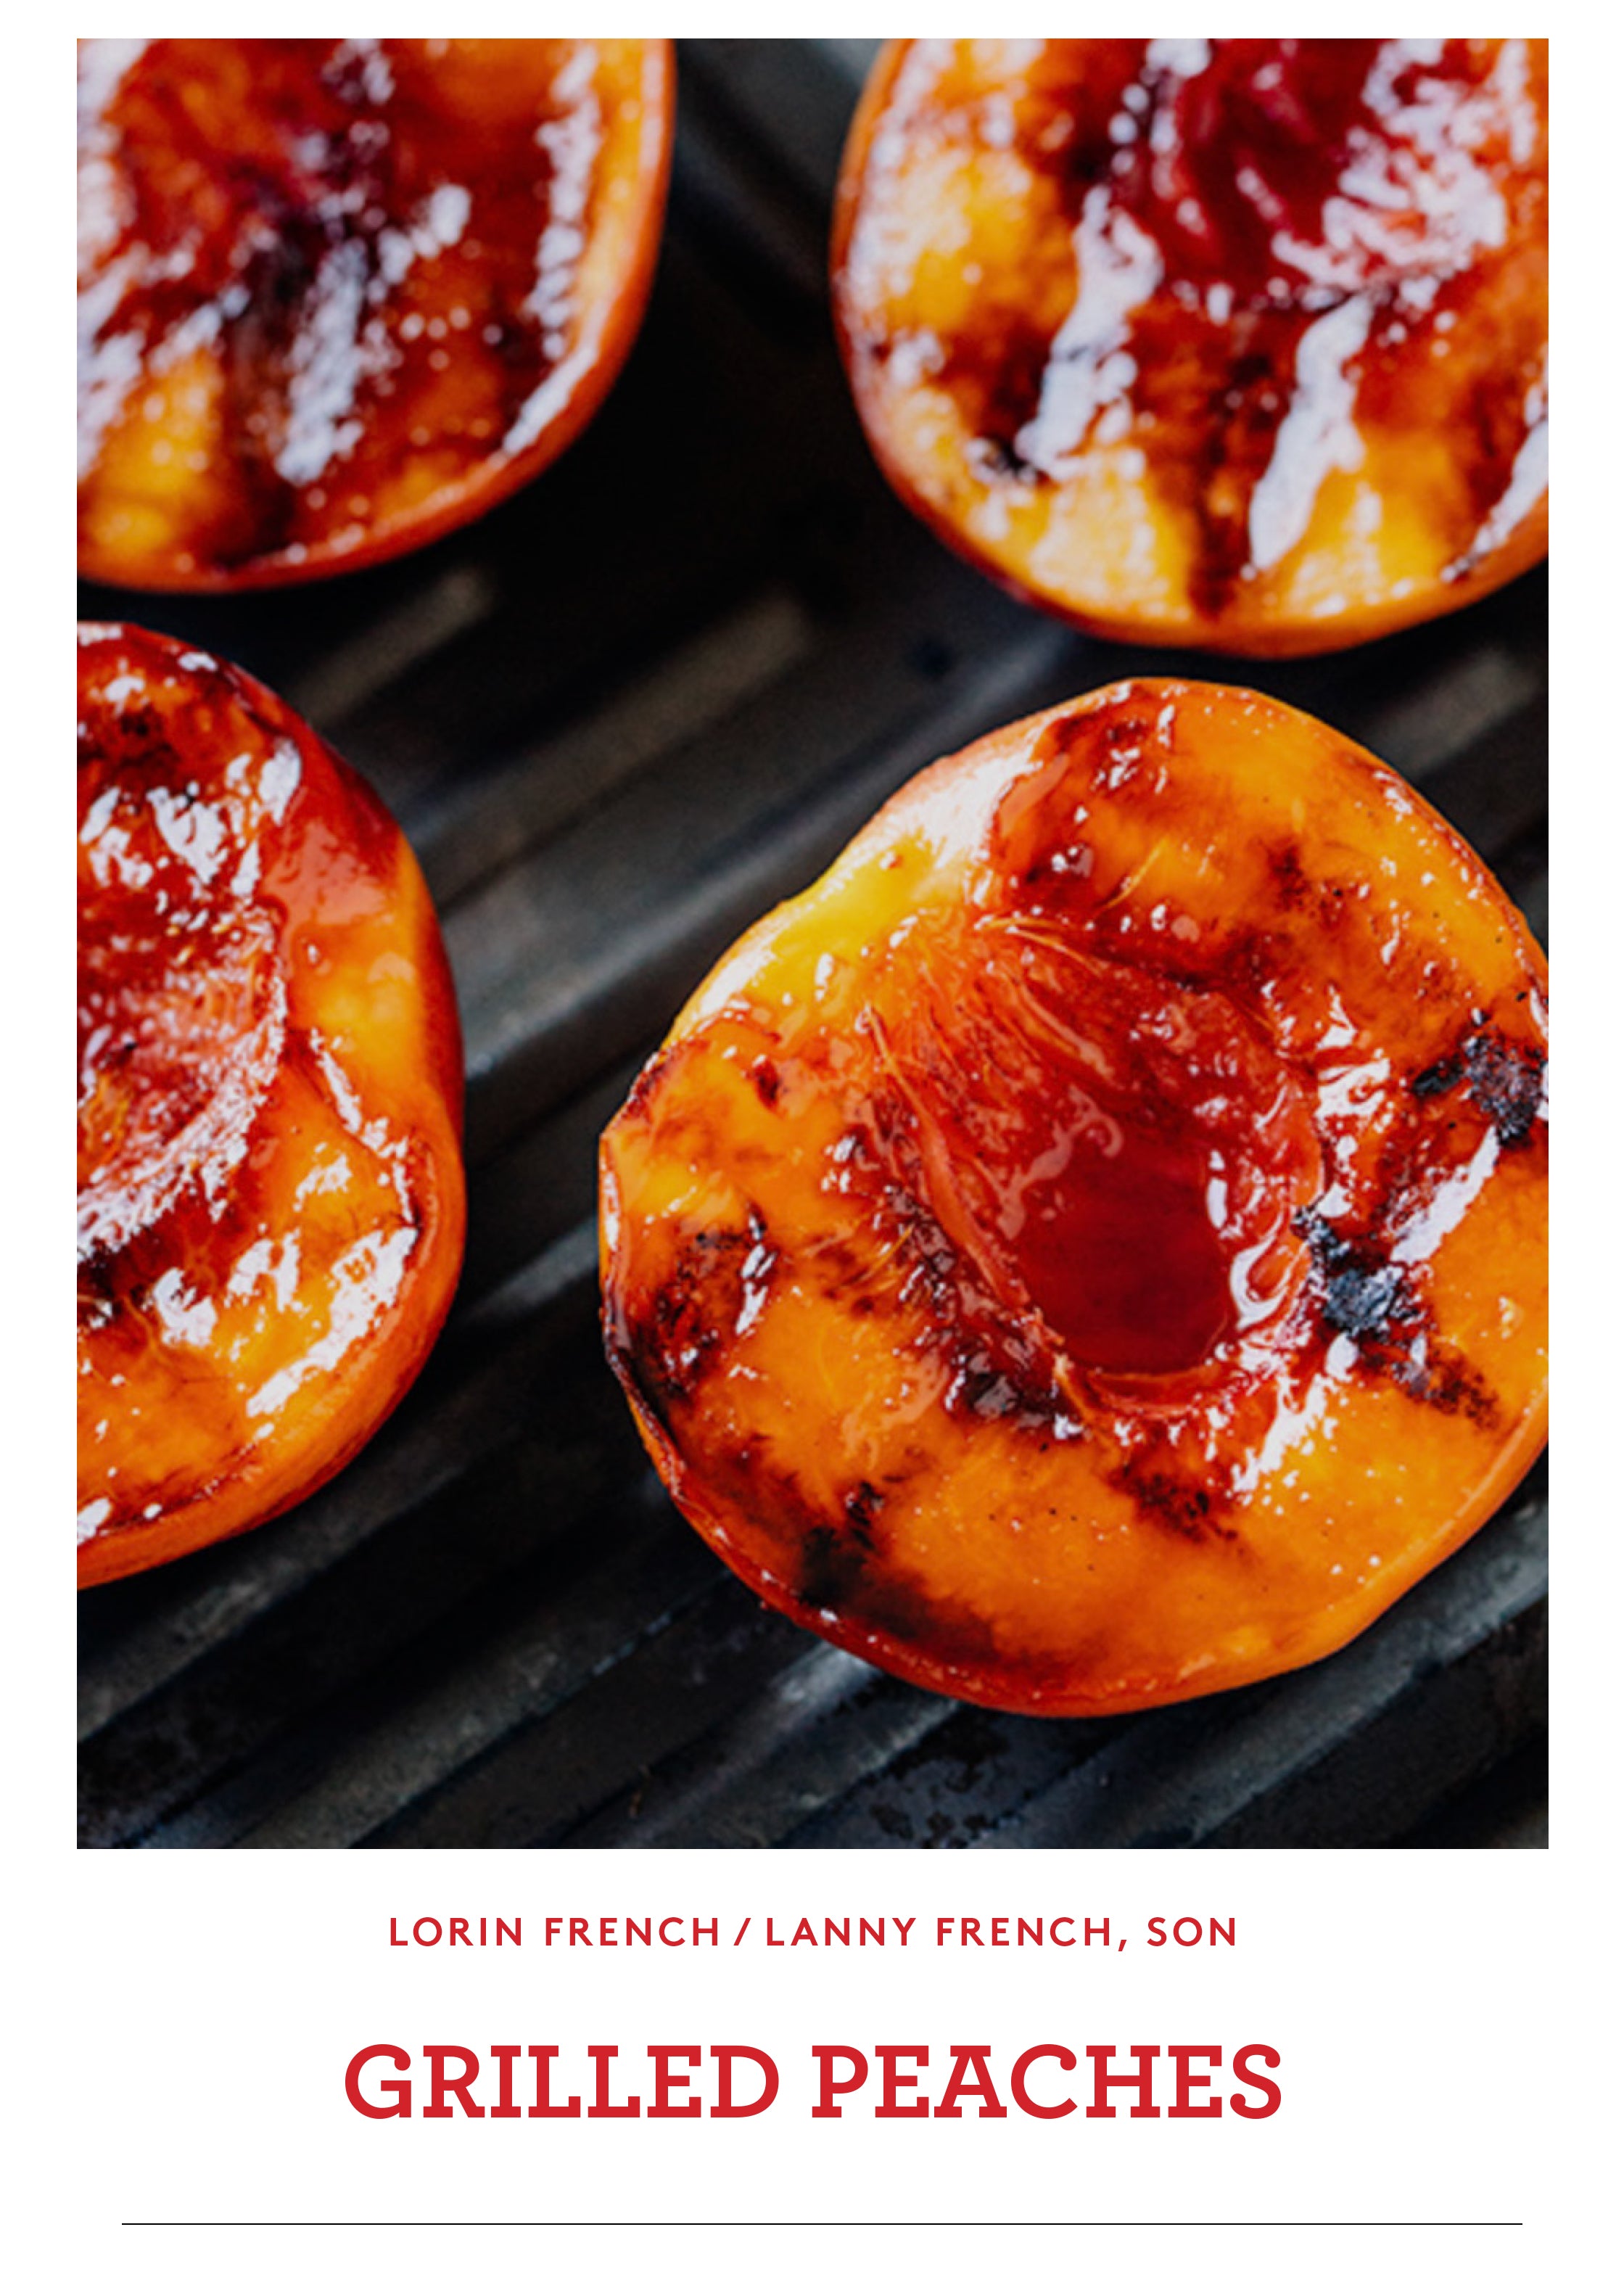 GRILLED PEACHED BY LORIN FRENCH